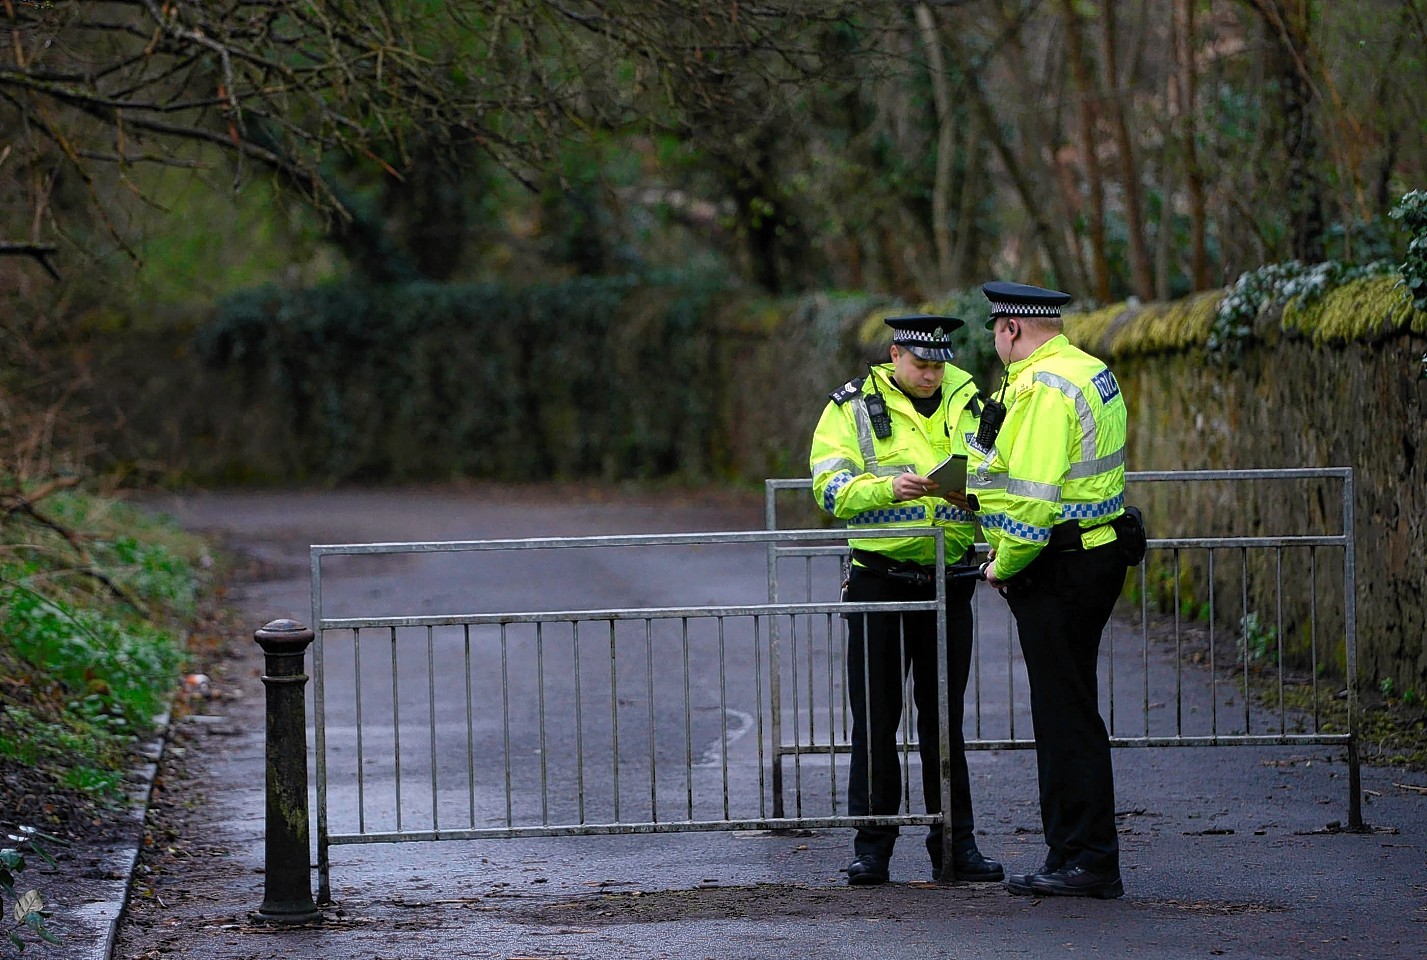 Police continue to search Dawsholm Park, Glasgow, April 15, 2015, where police say the hand bag of missing Irish student Karen Buckley, 24, was found